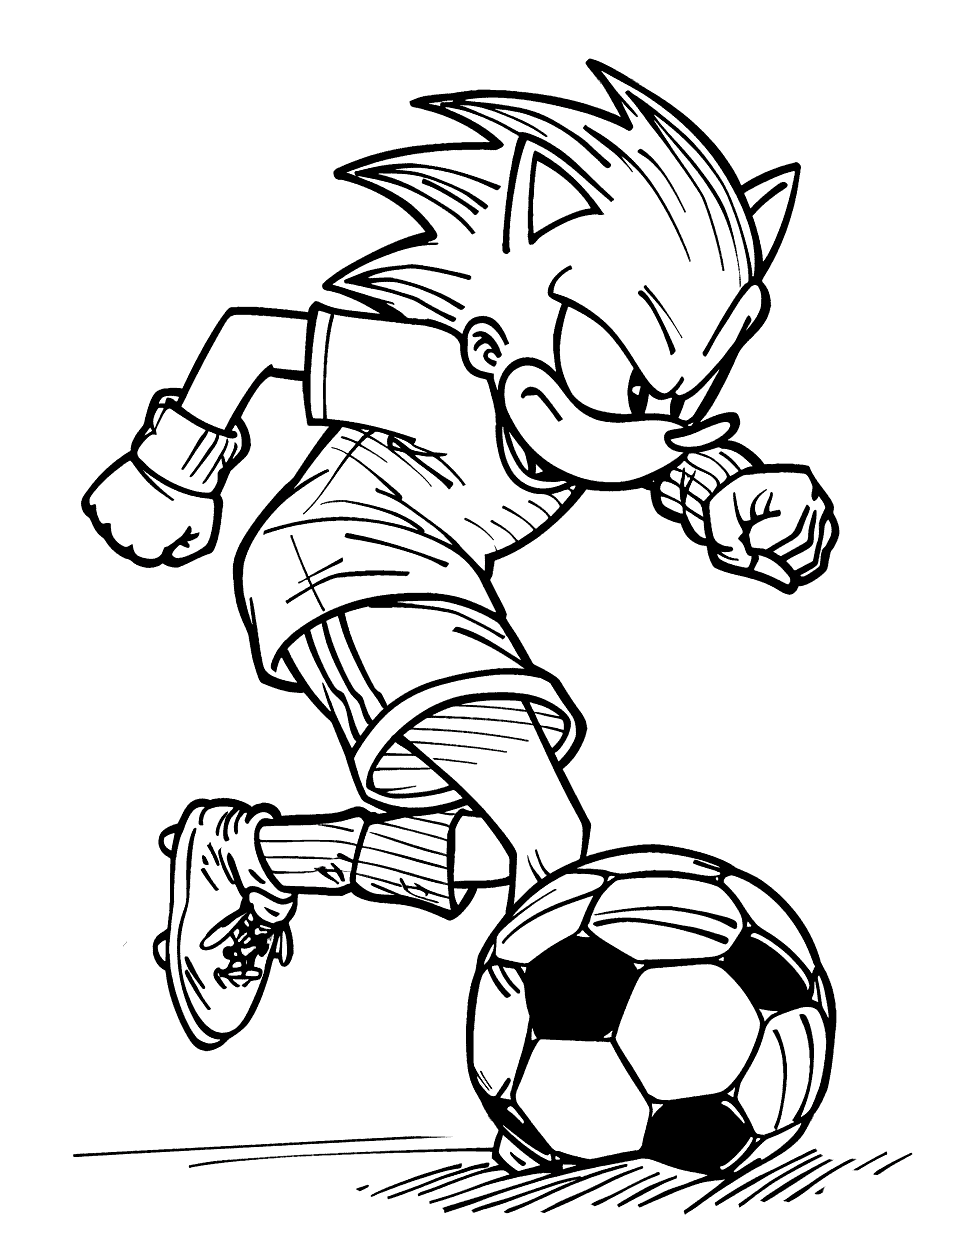 Sonic Playing Soccer Coloring Page - Sonic the Hedgehog dribbling a soccer ball down the field.